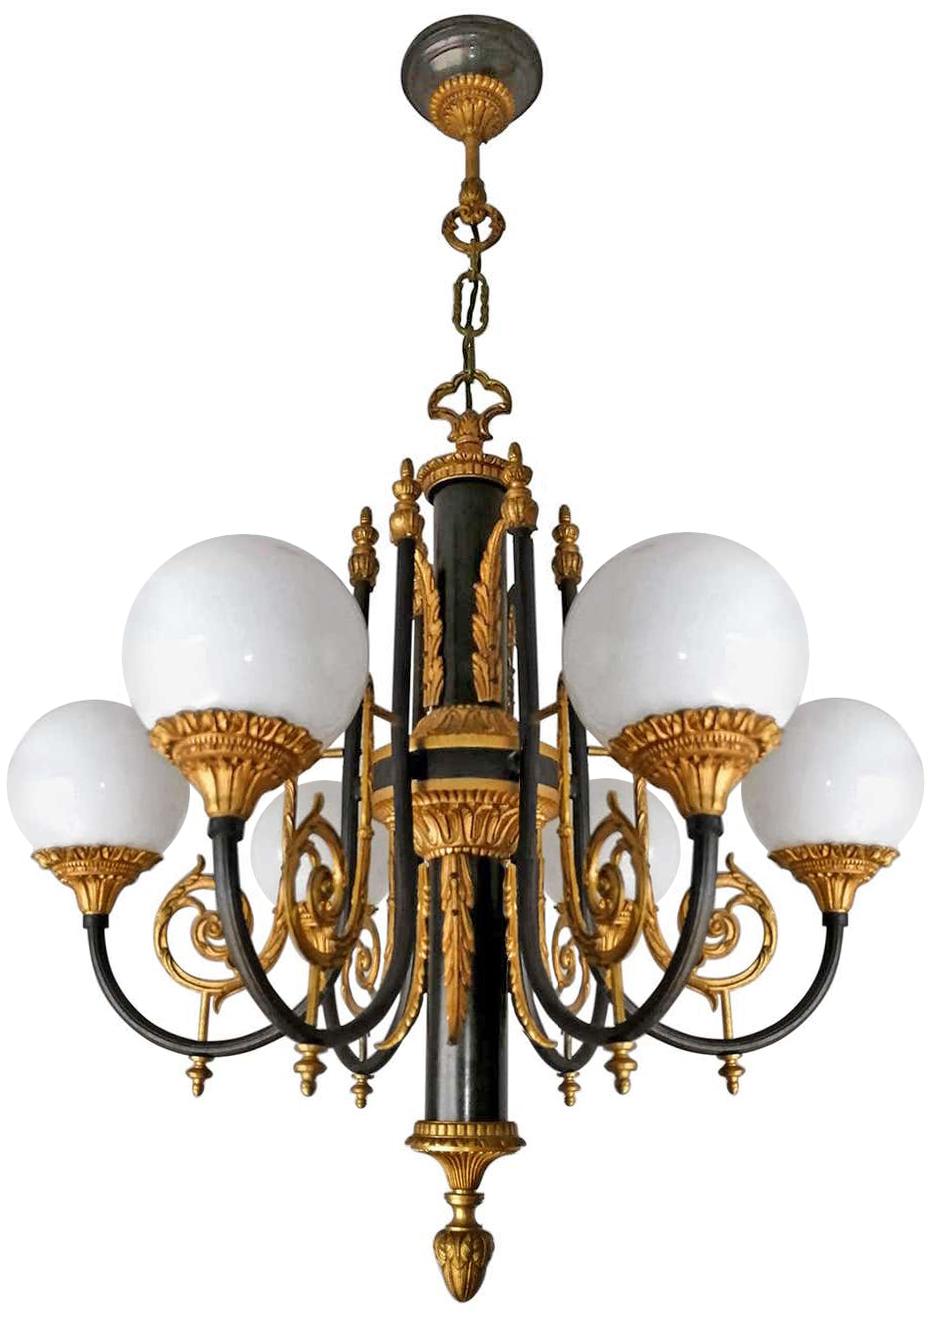 Pair of Antique French Empire Neoclassical Chandelier w Gilt & Patina Bronze PPU For Sale 1